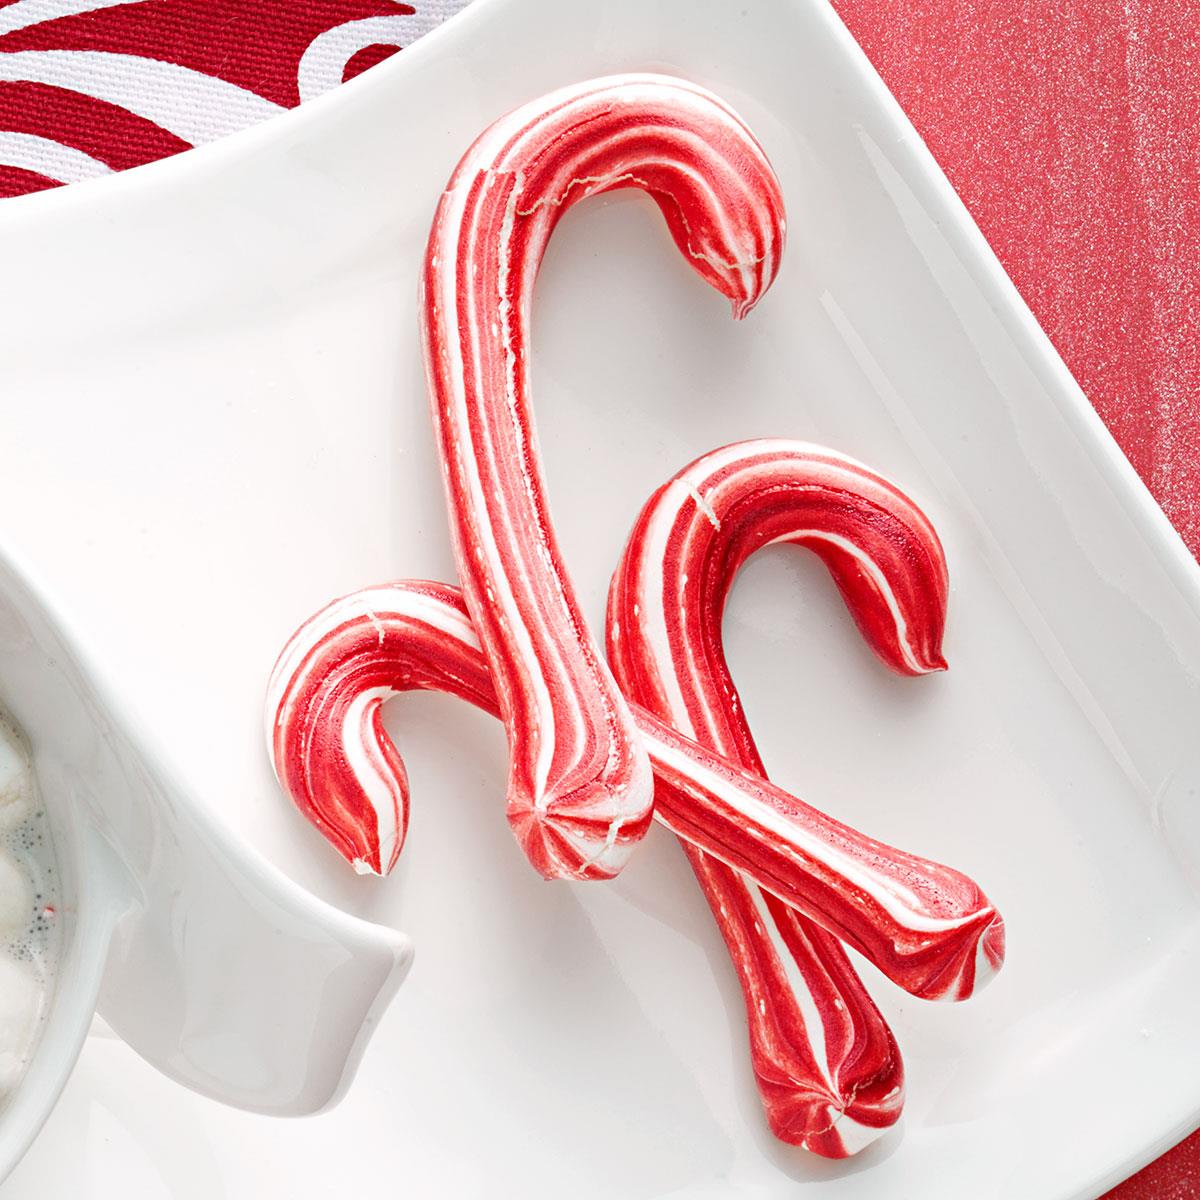 Candy cane images.